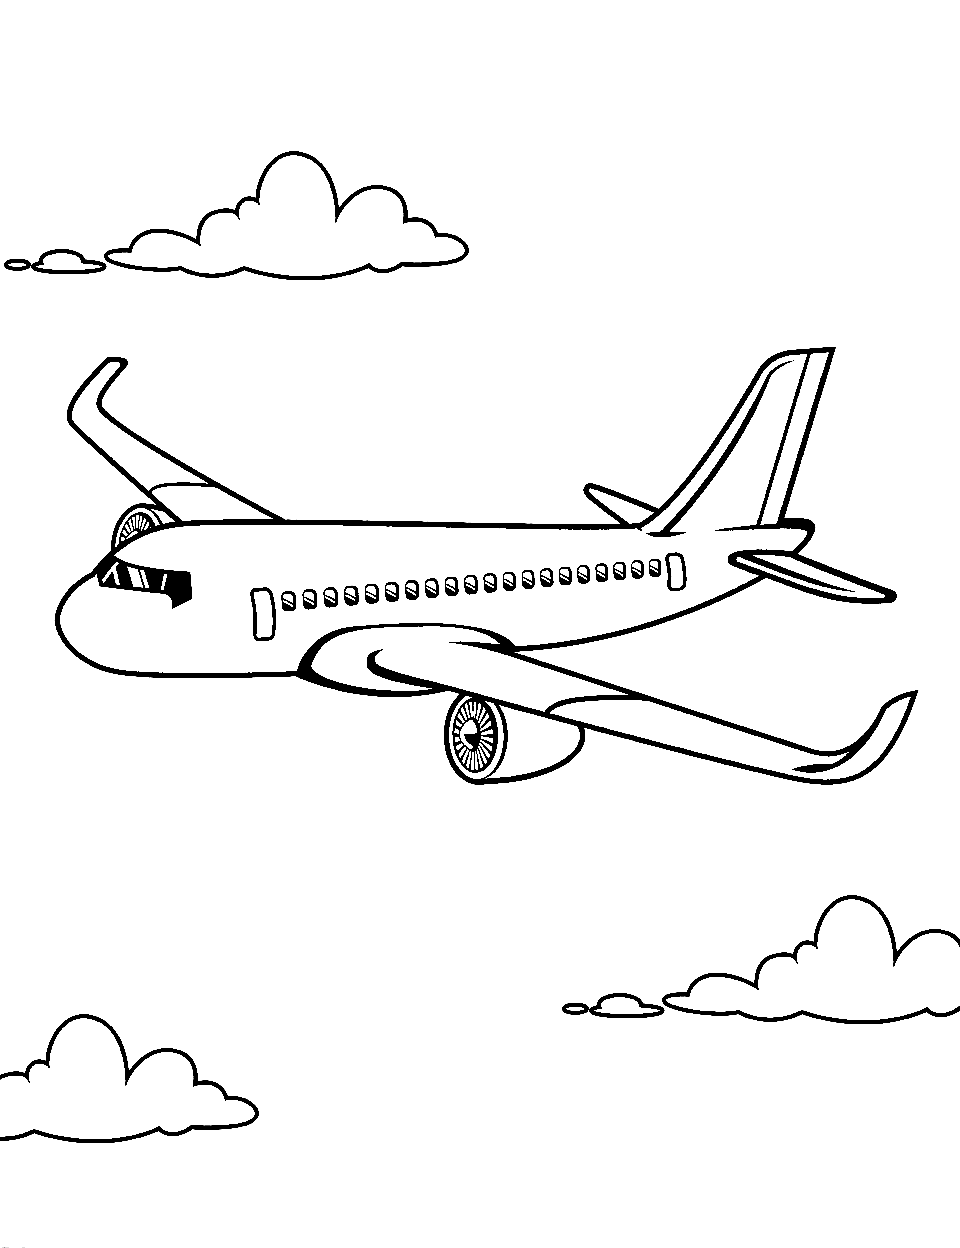 Realistic Jet Flight Airplane Coloring Page - A sleek, modern jet soaring through the sky with minimal clouds.